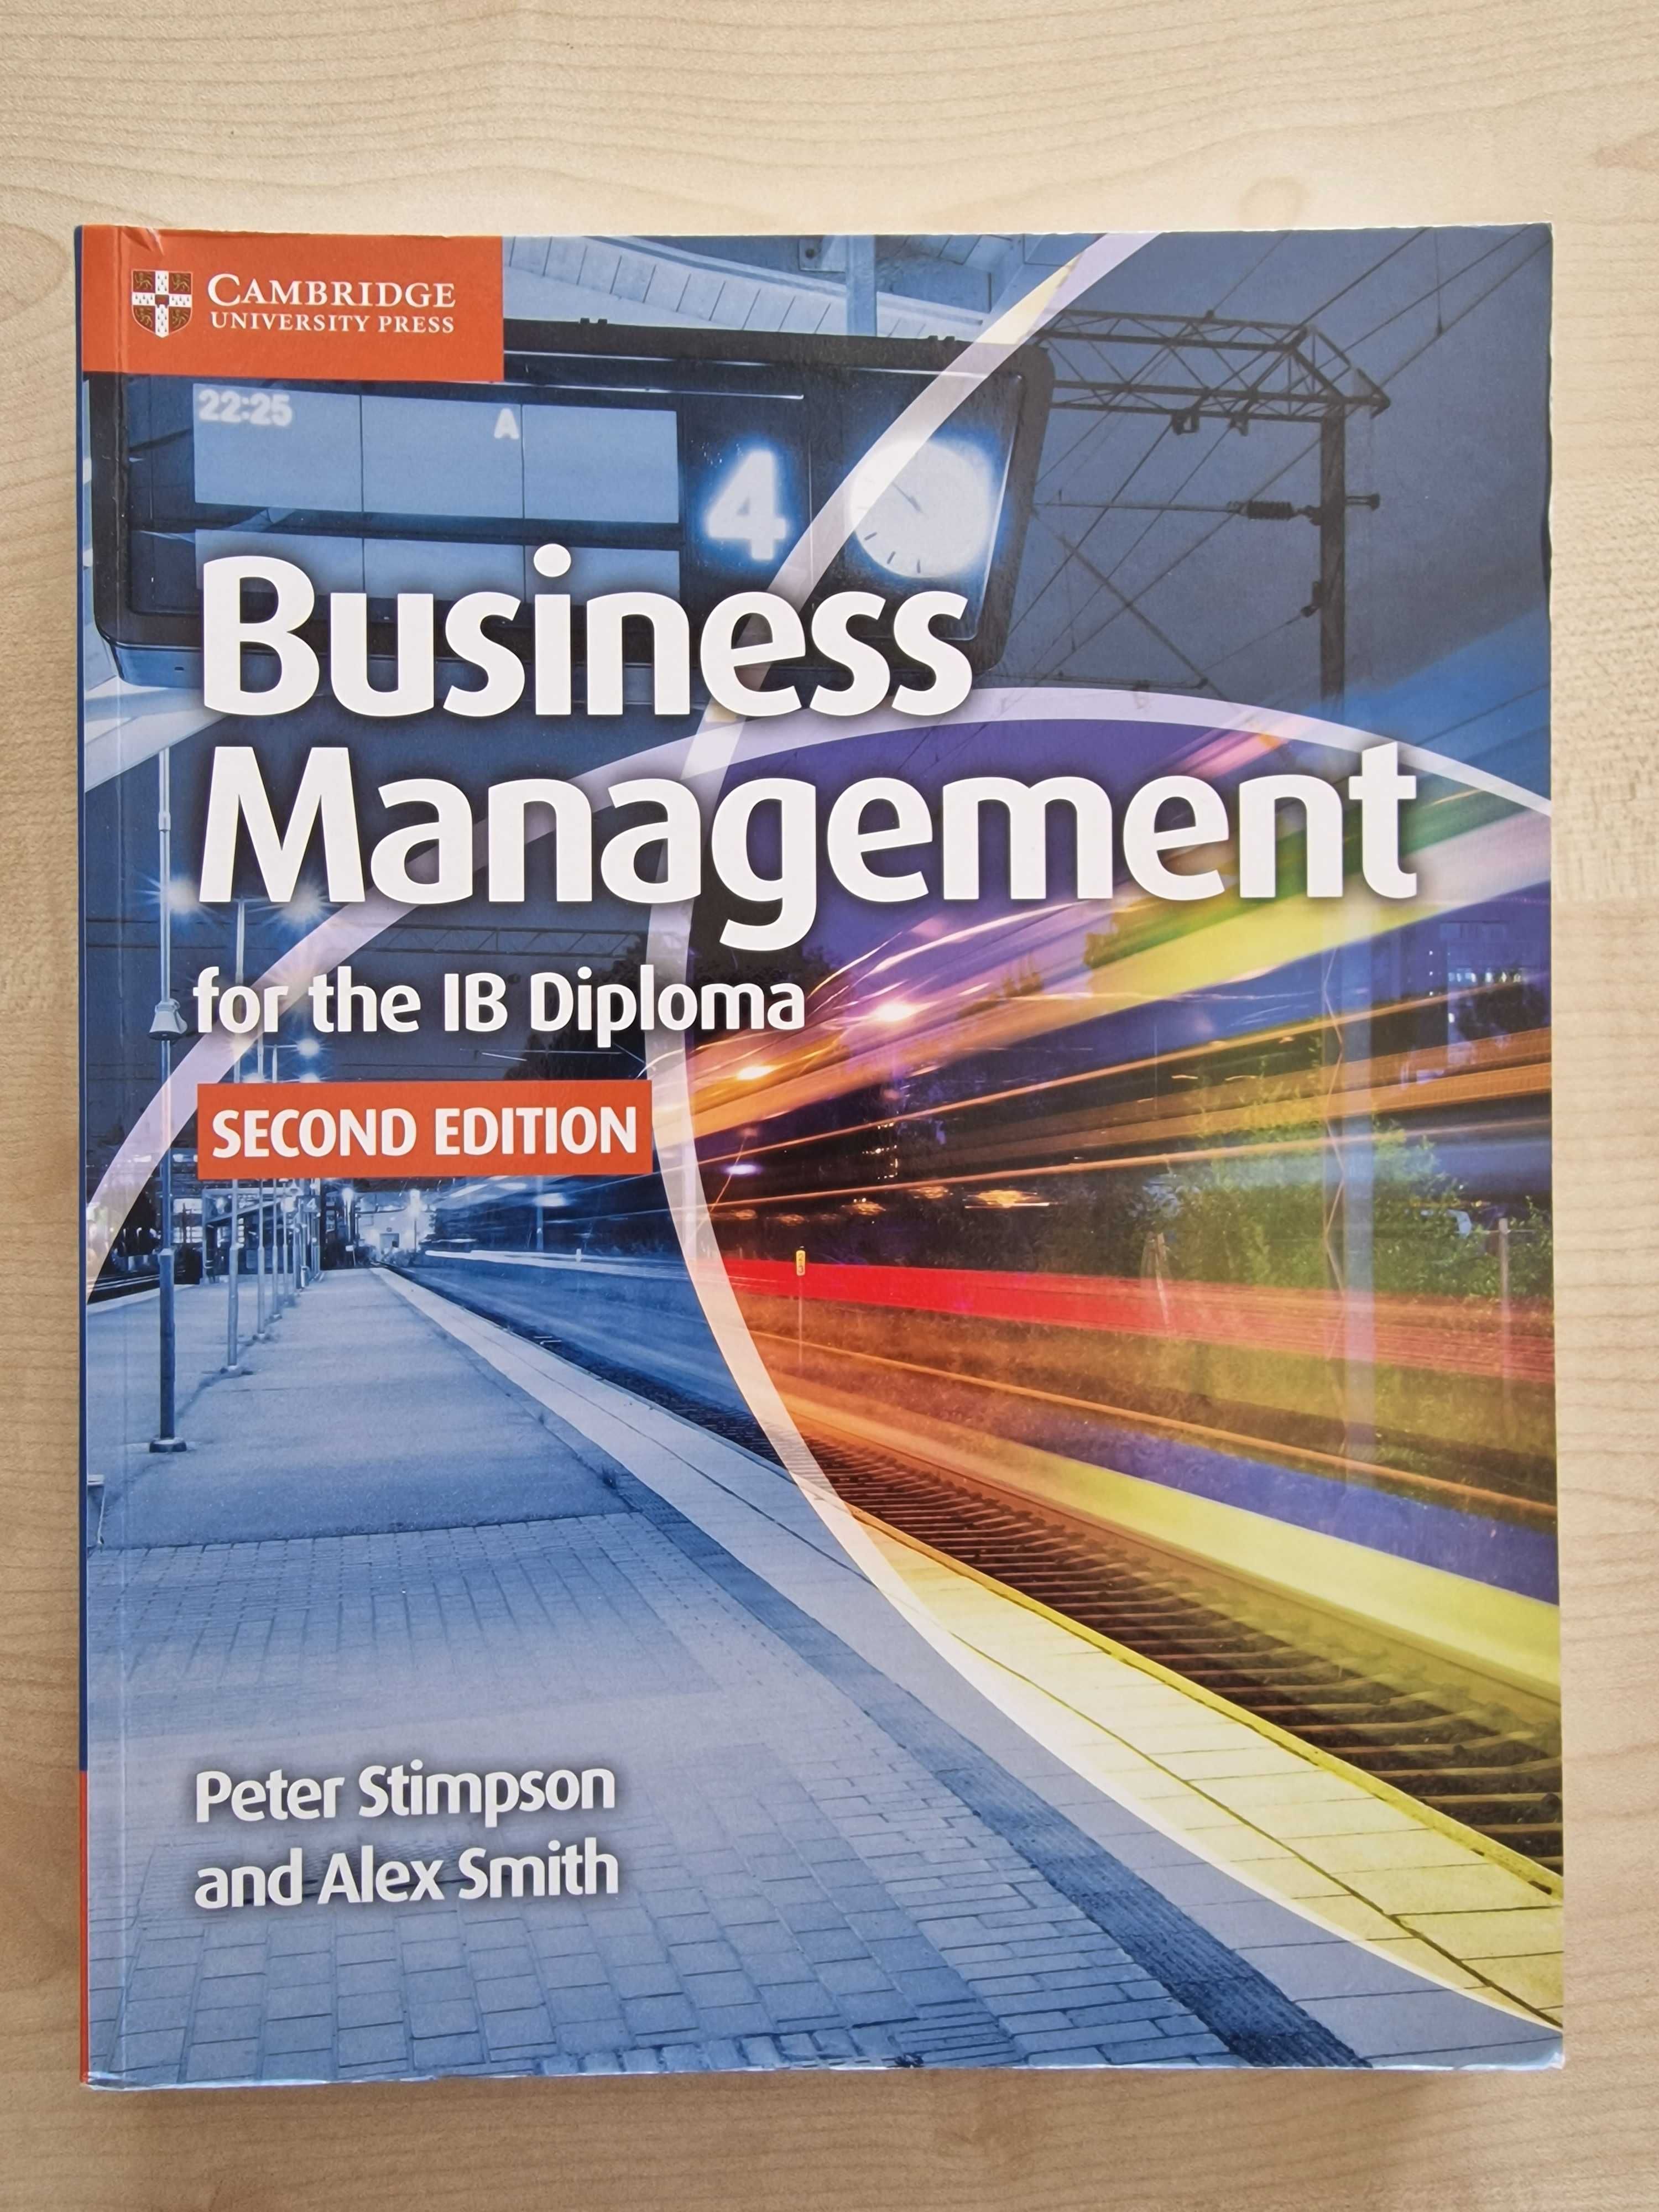 Business Management for IB Diploma 2nd Edition, Cambridge University